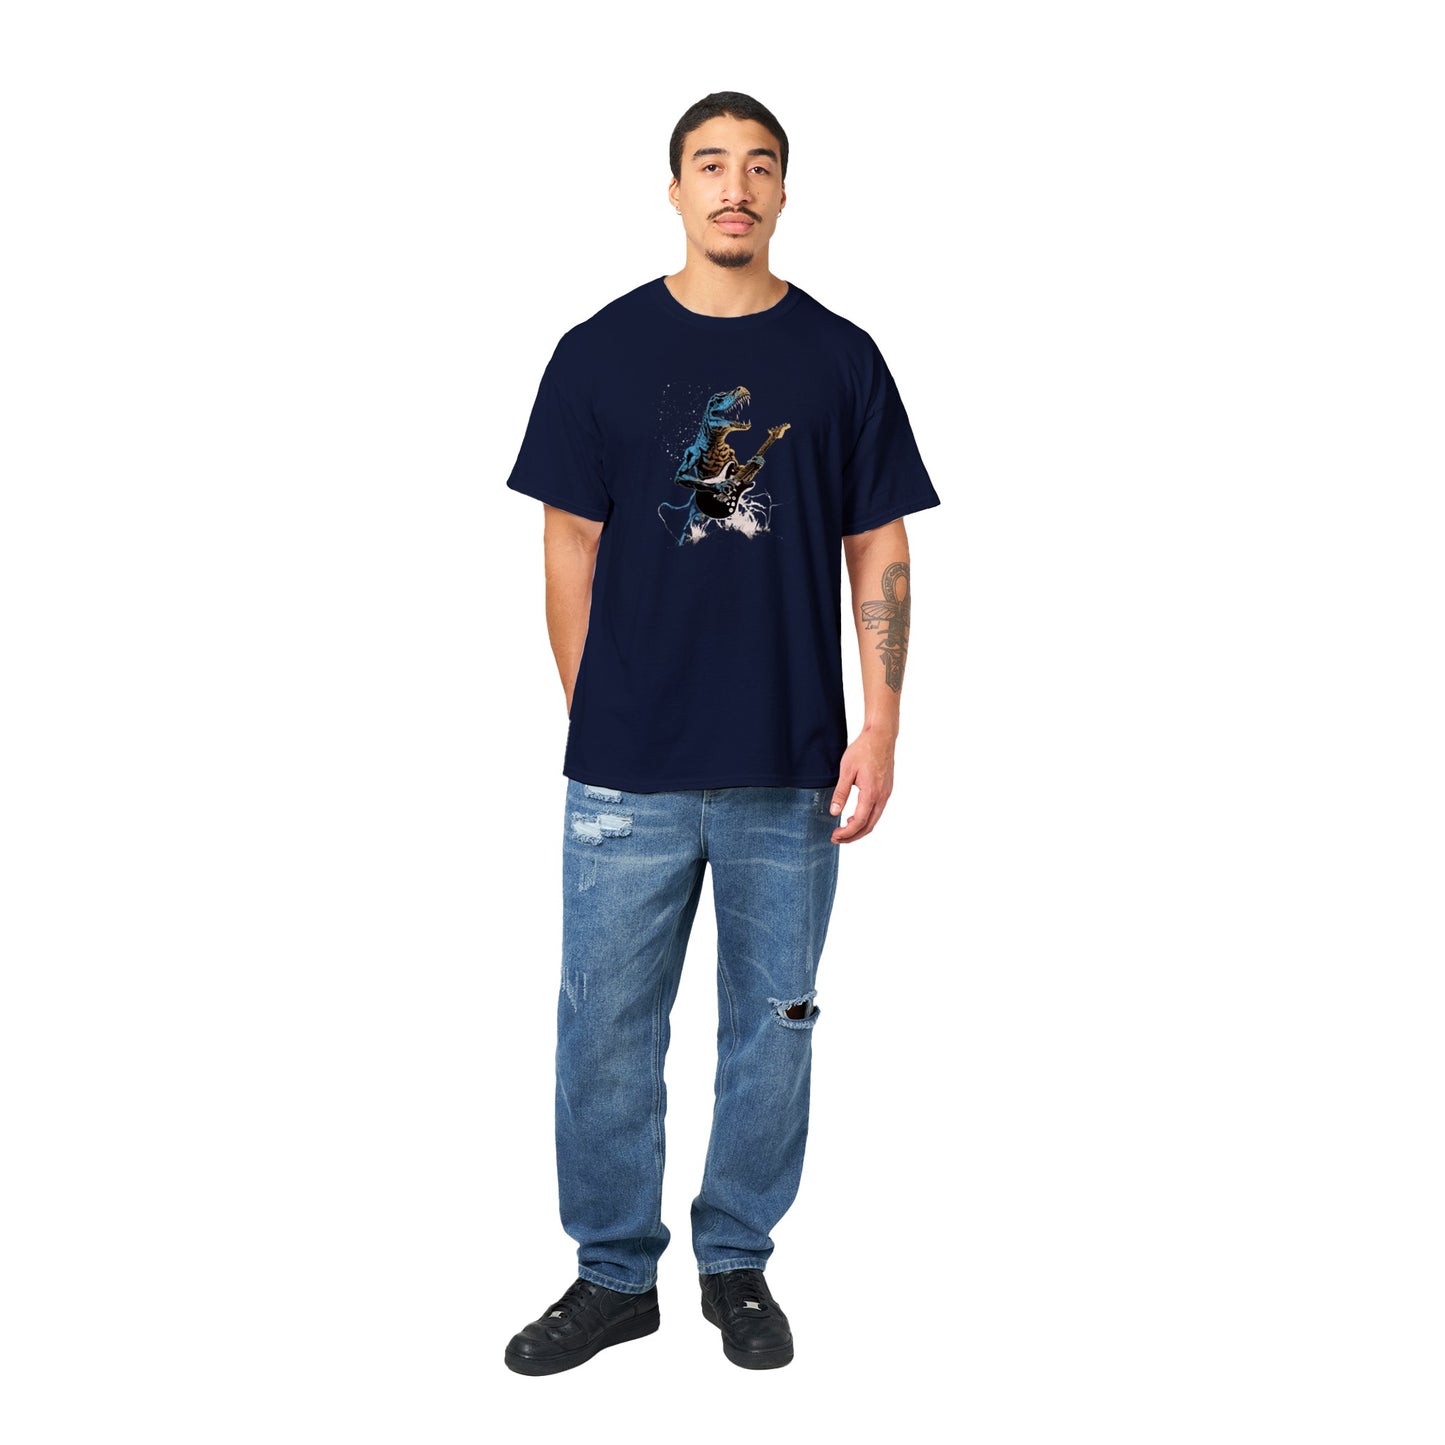 A guy wearing a navy t-shirt with a t-rex shredding out on a guitar print